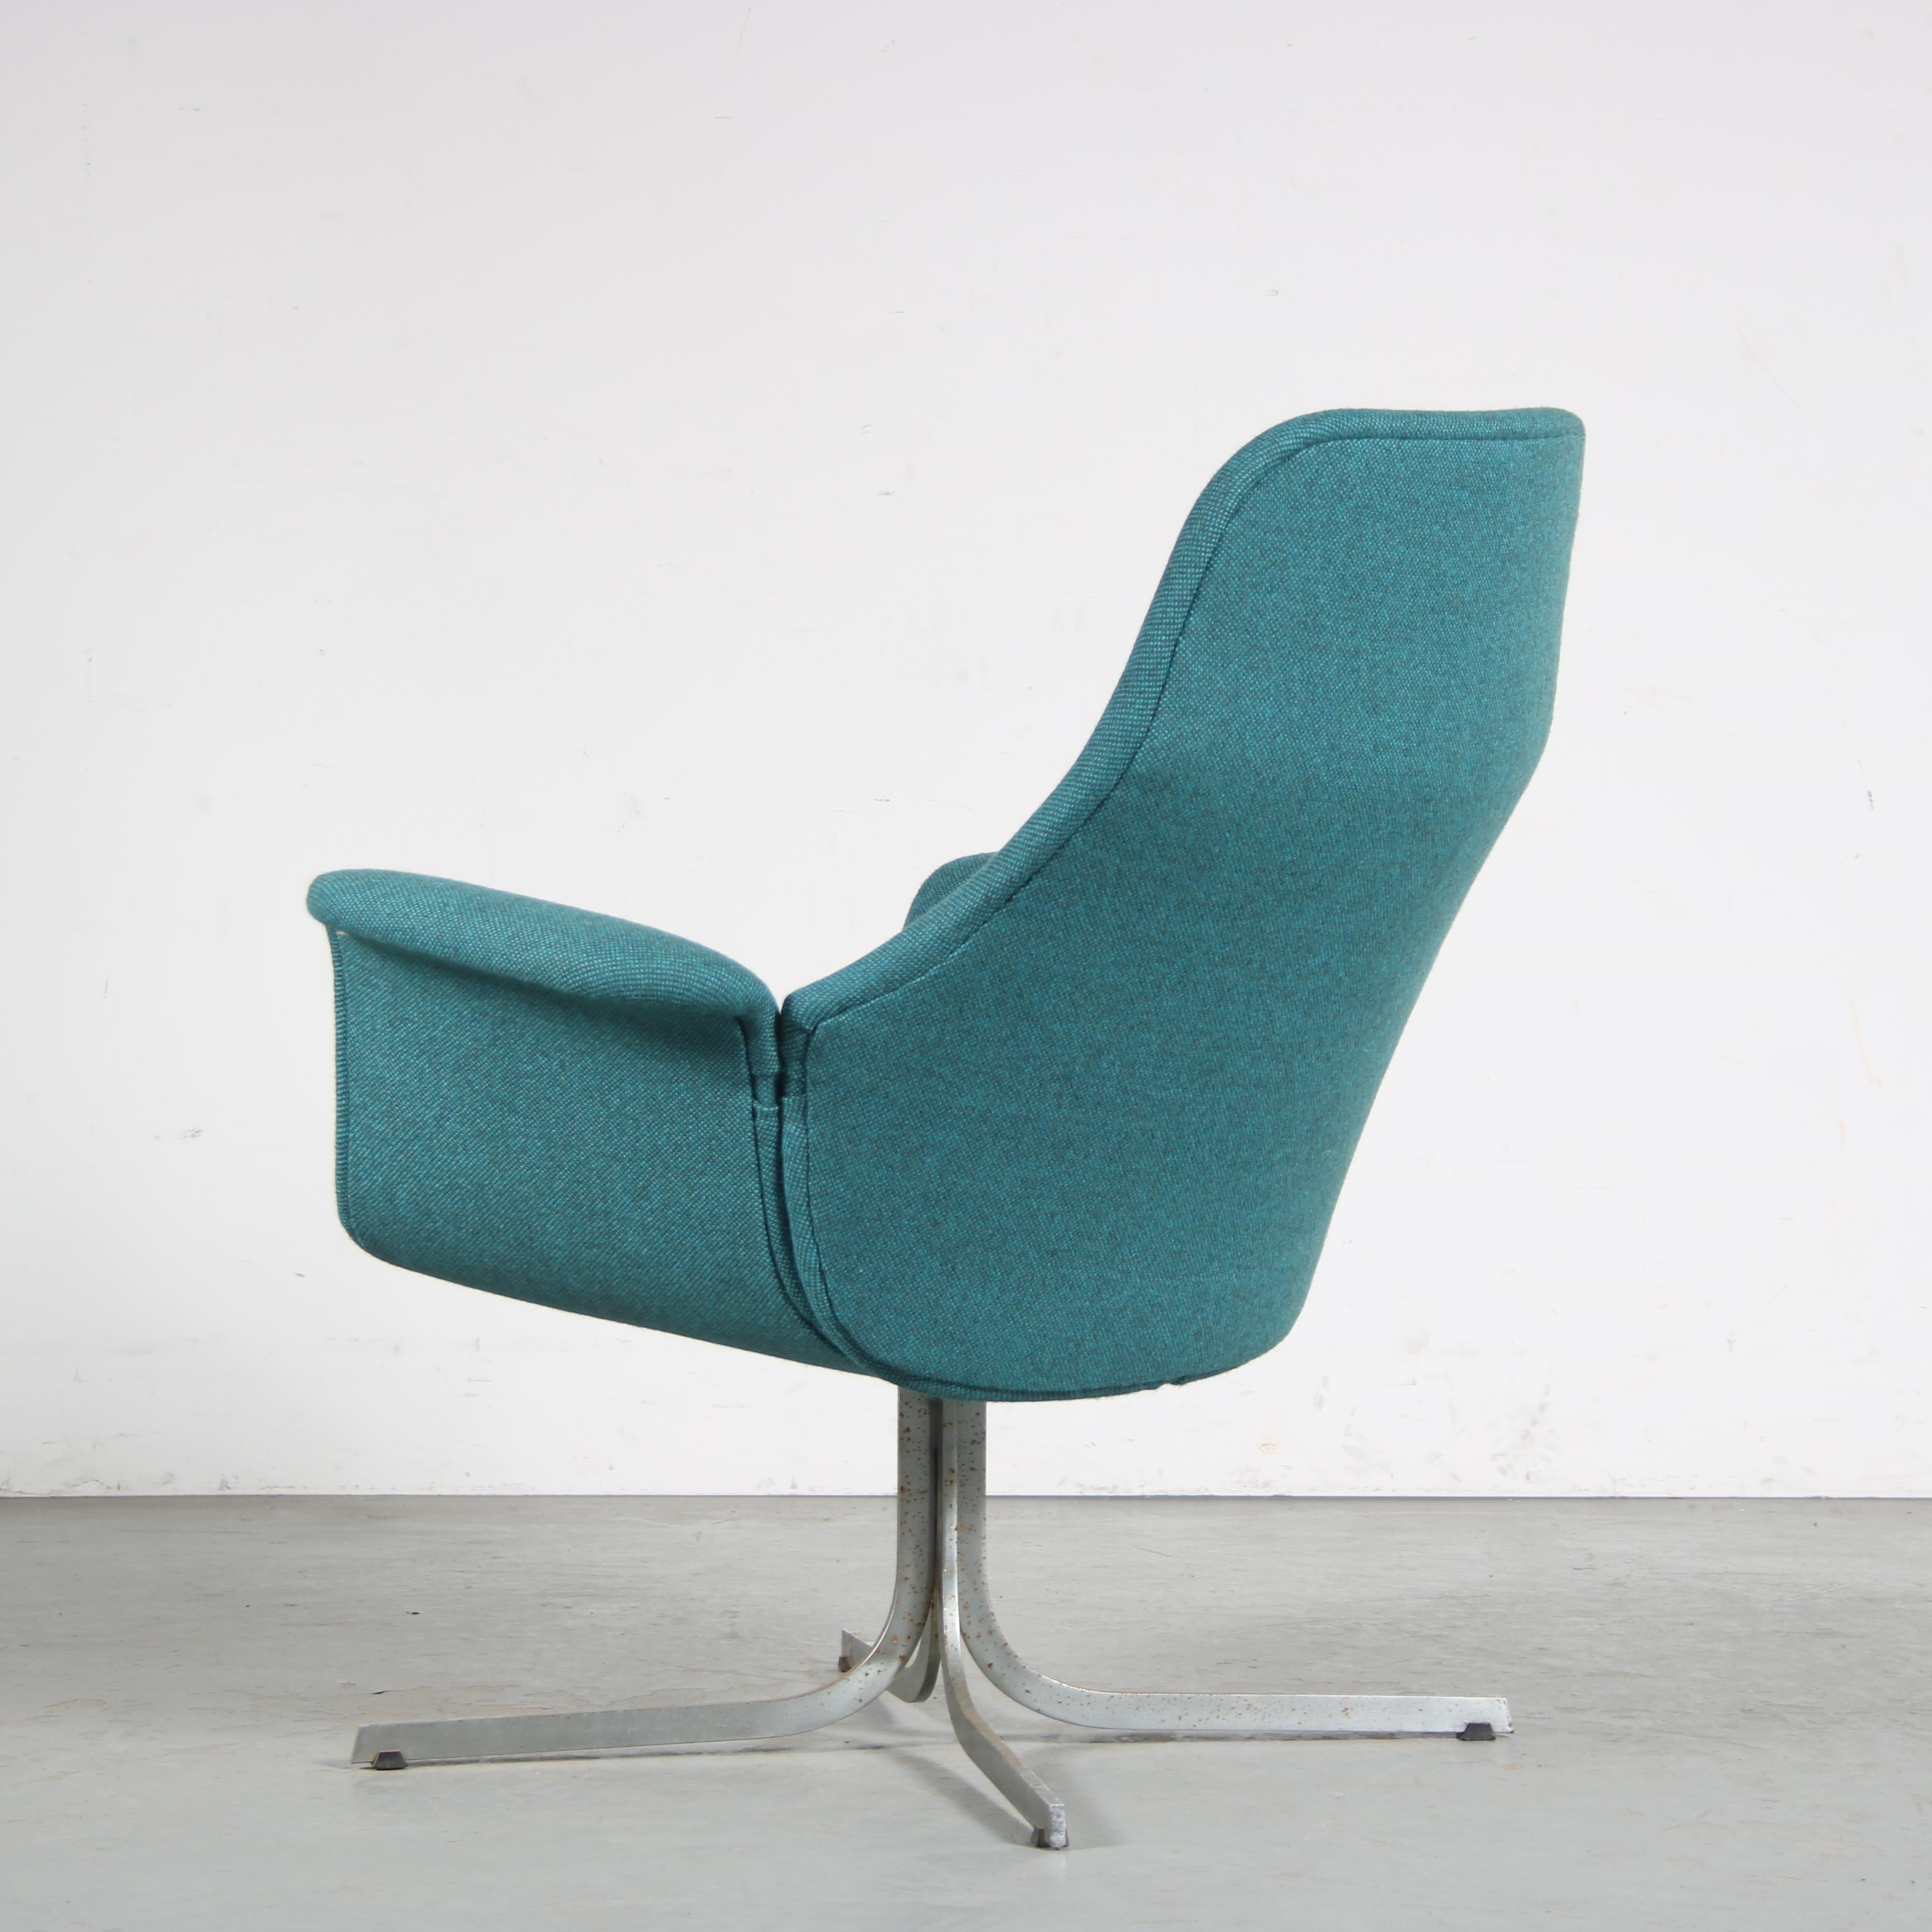 Rare Pierre Paulin Lounge Chair for Artifort, Netherlands 1950 In Good Condition For Sale In Amsterdam, NL